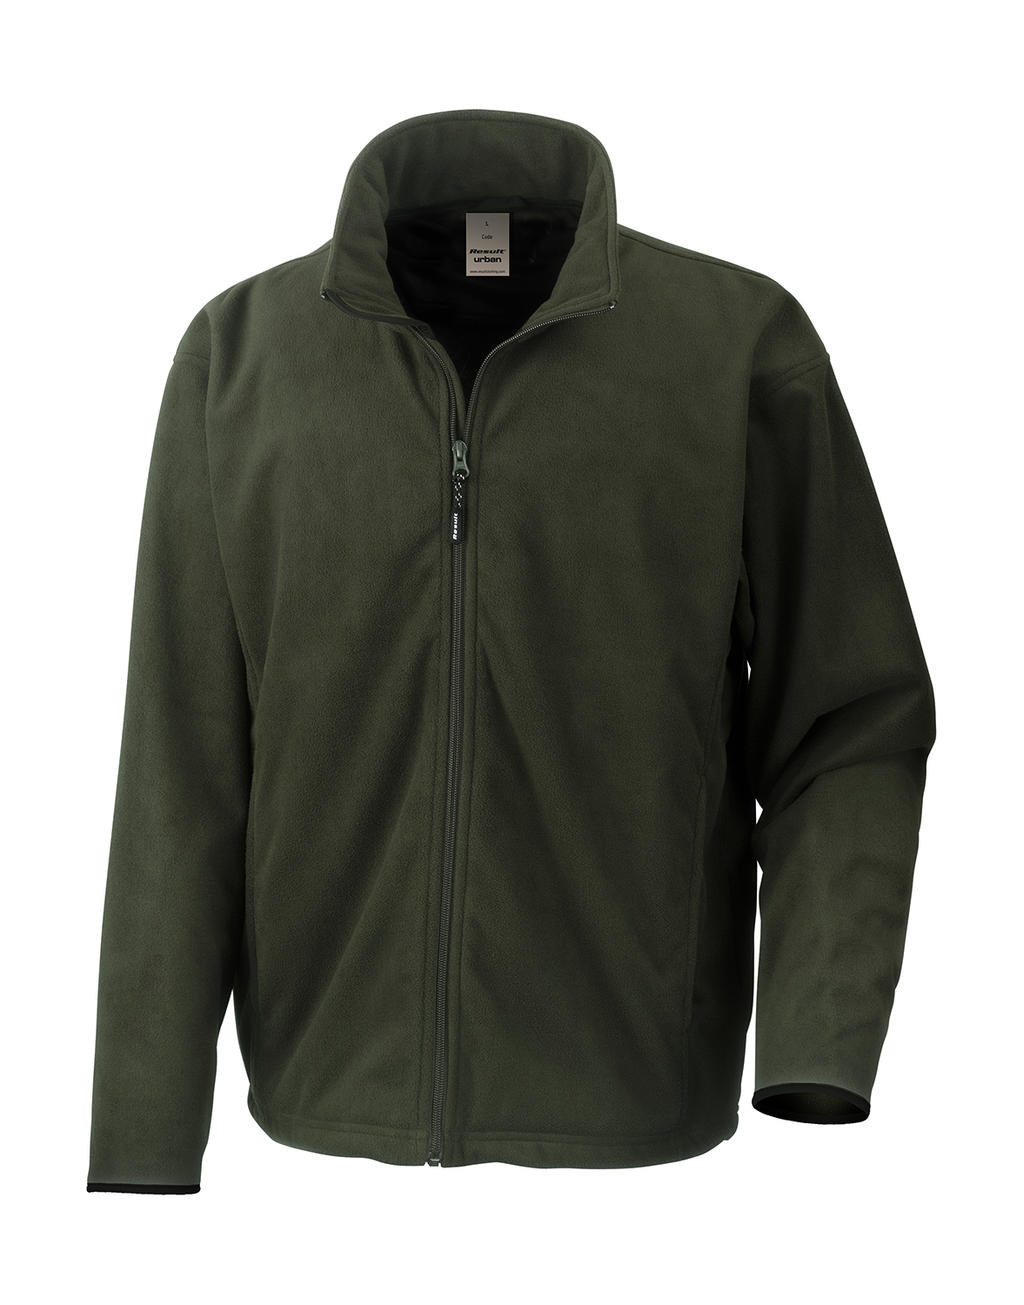  Climate Stopper Water Resistant Fleece in Farbe Moss Green